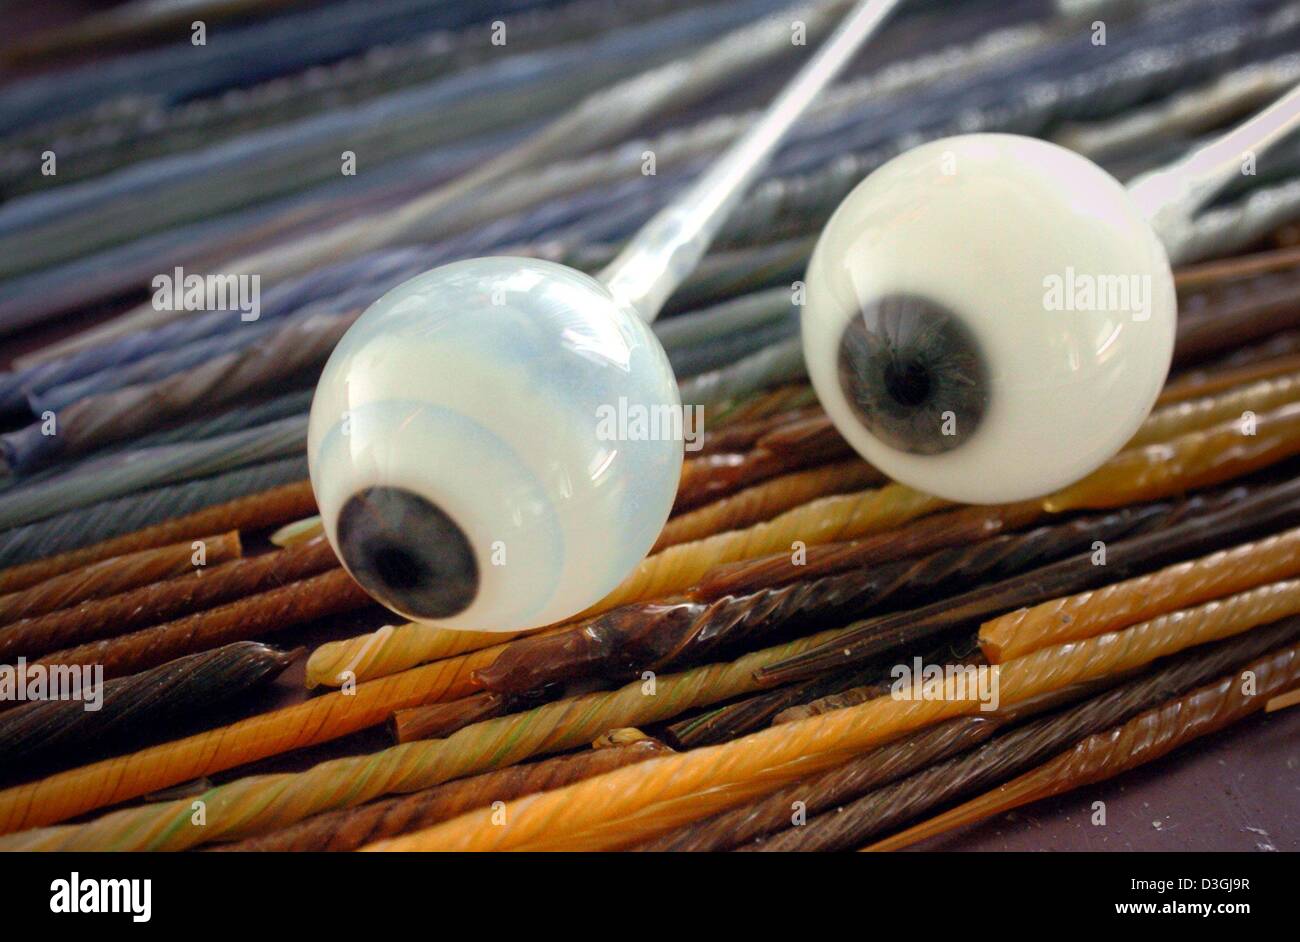 (dpa) - Two not yet finished glass eyeballs lie on coloured glass sticks at Augenprothetik Lauscha eye prostheses manufacturer in Lauscha, Germany, 3 August 2004. The coloured glass sticks are used for the replication of the iris on the glass eyeballs. Artificial glass eyes were invented and first produced in 1835 by Ludwig Mueller-Uri in Lauscha, eastern Germany. The eyes are prod Stock Photo